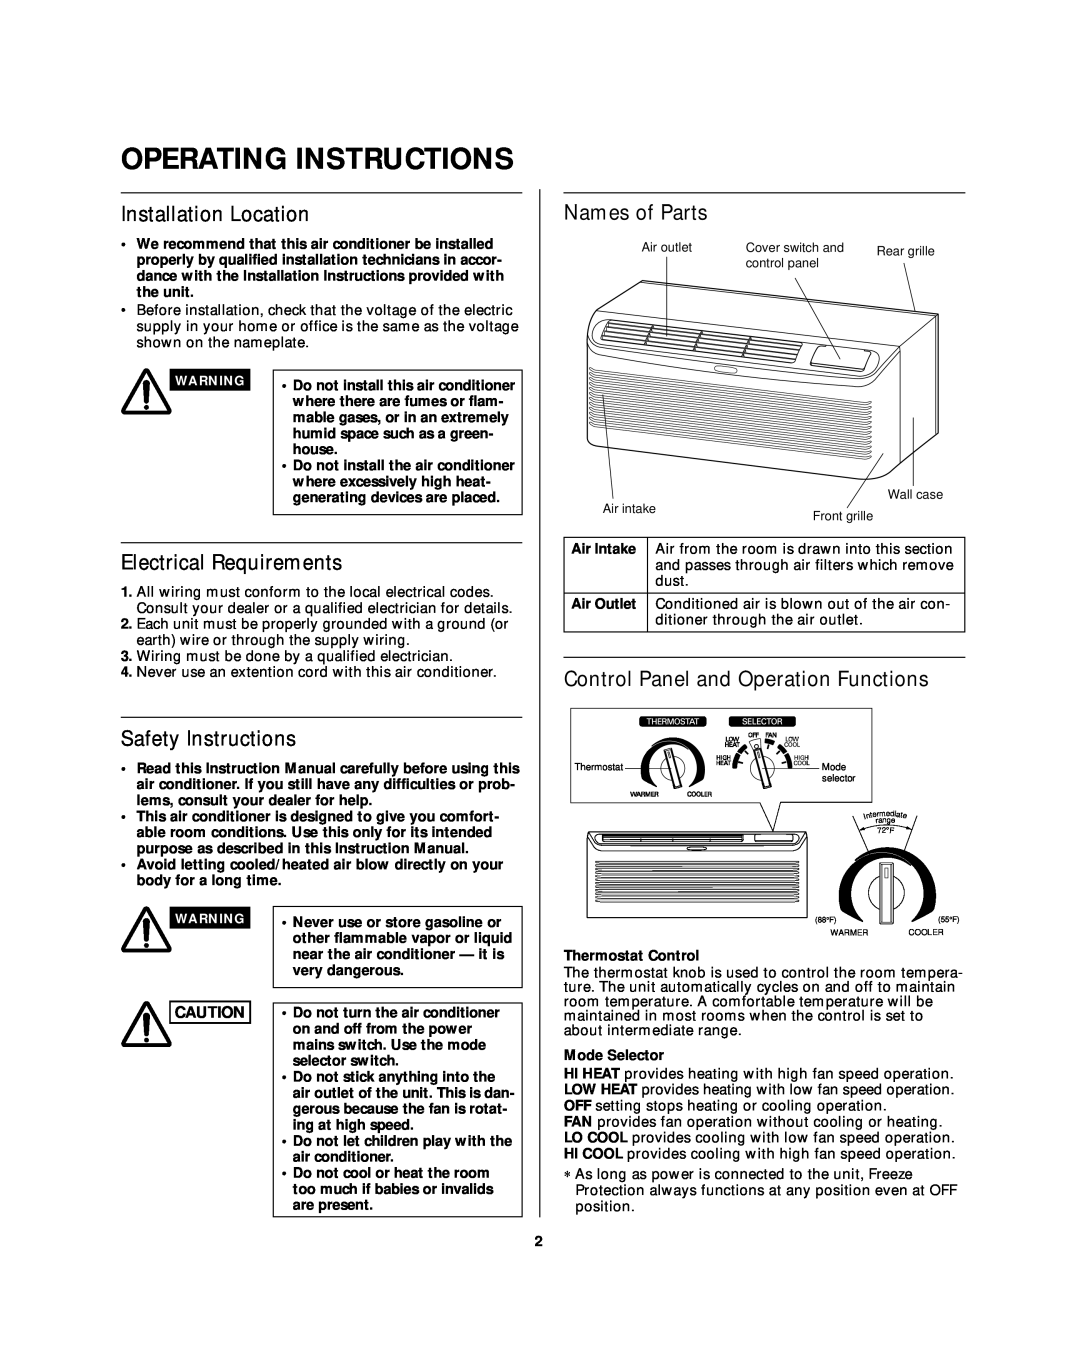 Sanyo STW-2 Series Operating Instructions, Installation Location, Names of Parts, Electrical Requirements, very dangerous 